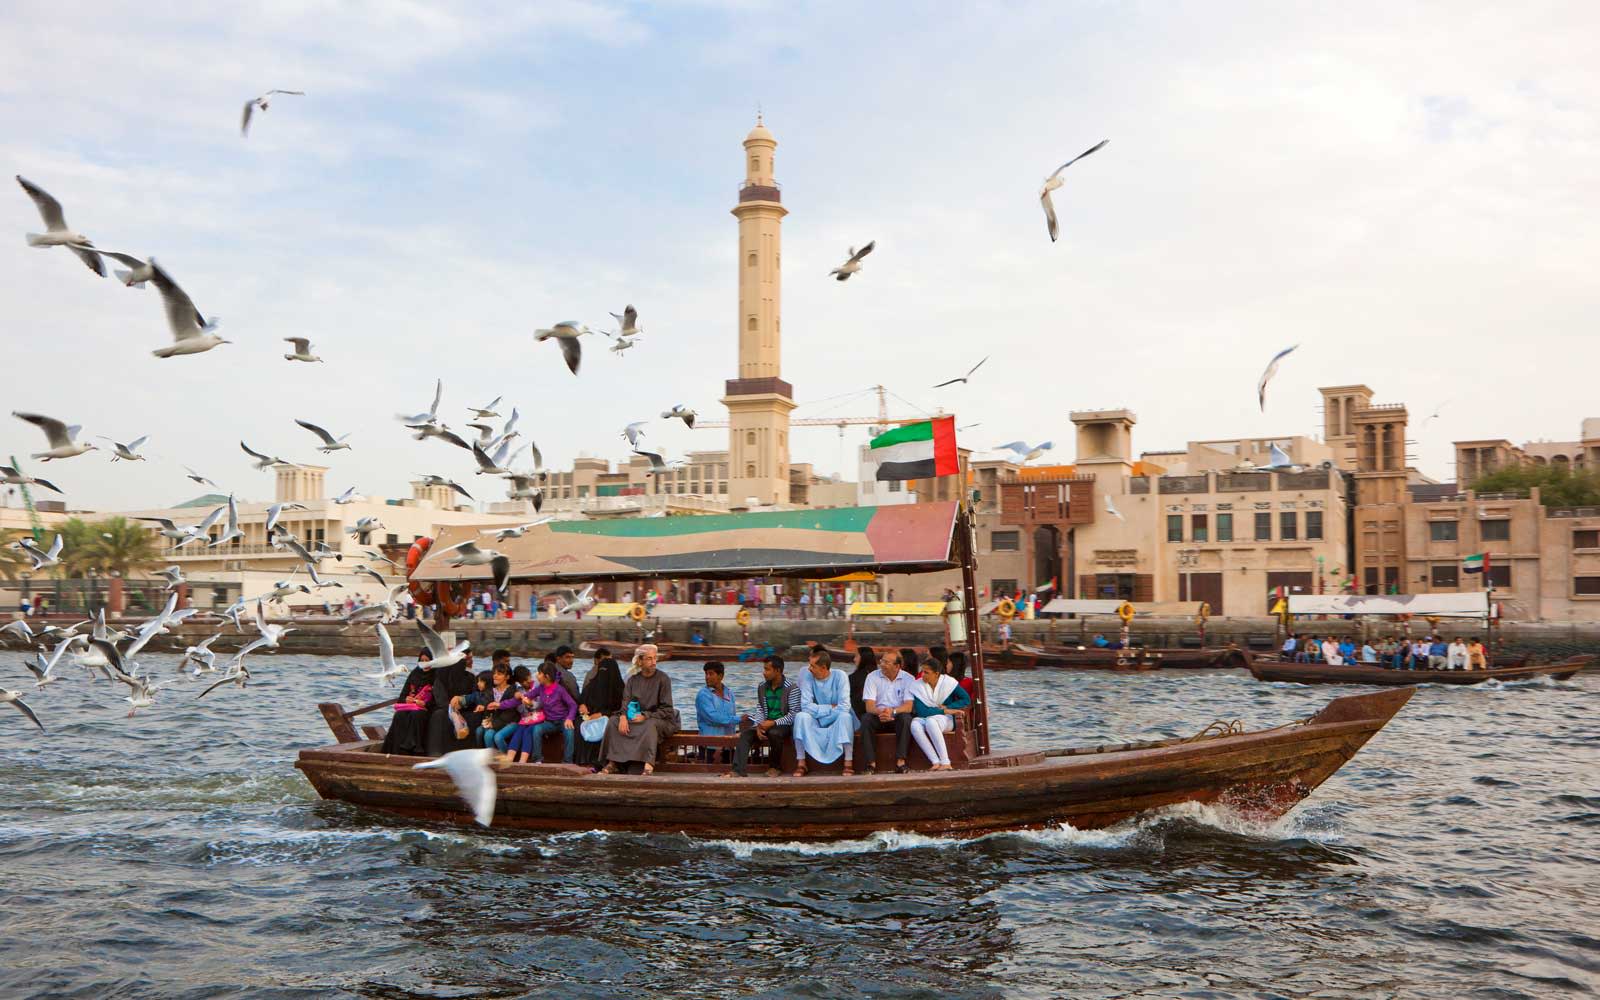 The Best Things to Do in Dubai, According to People Who Live There